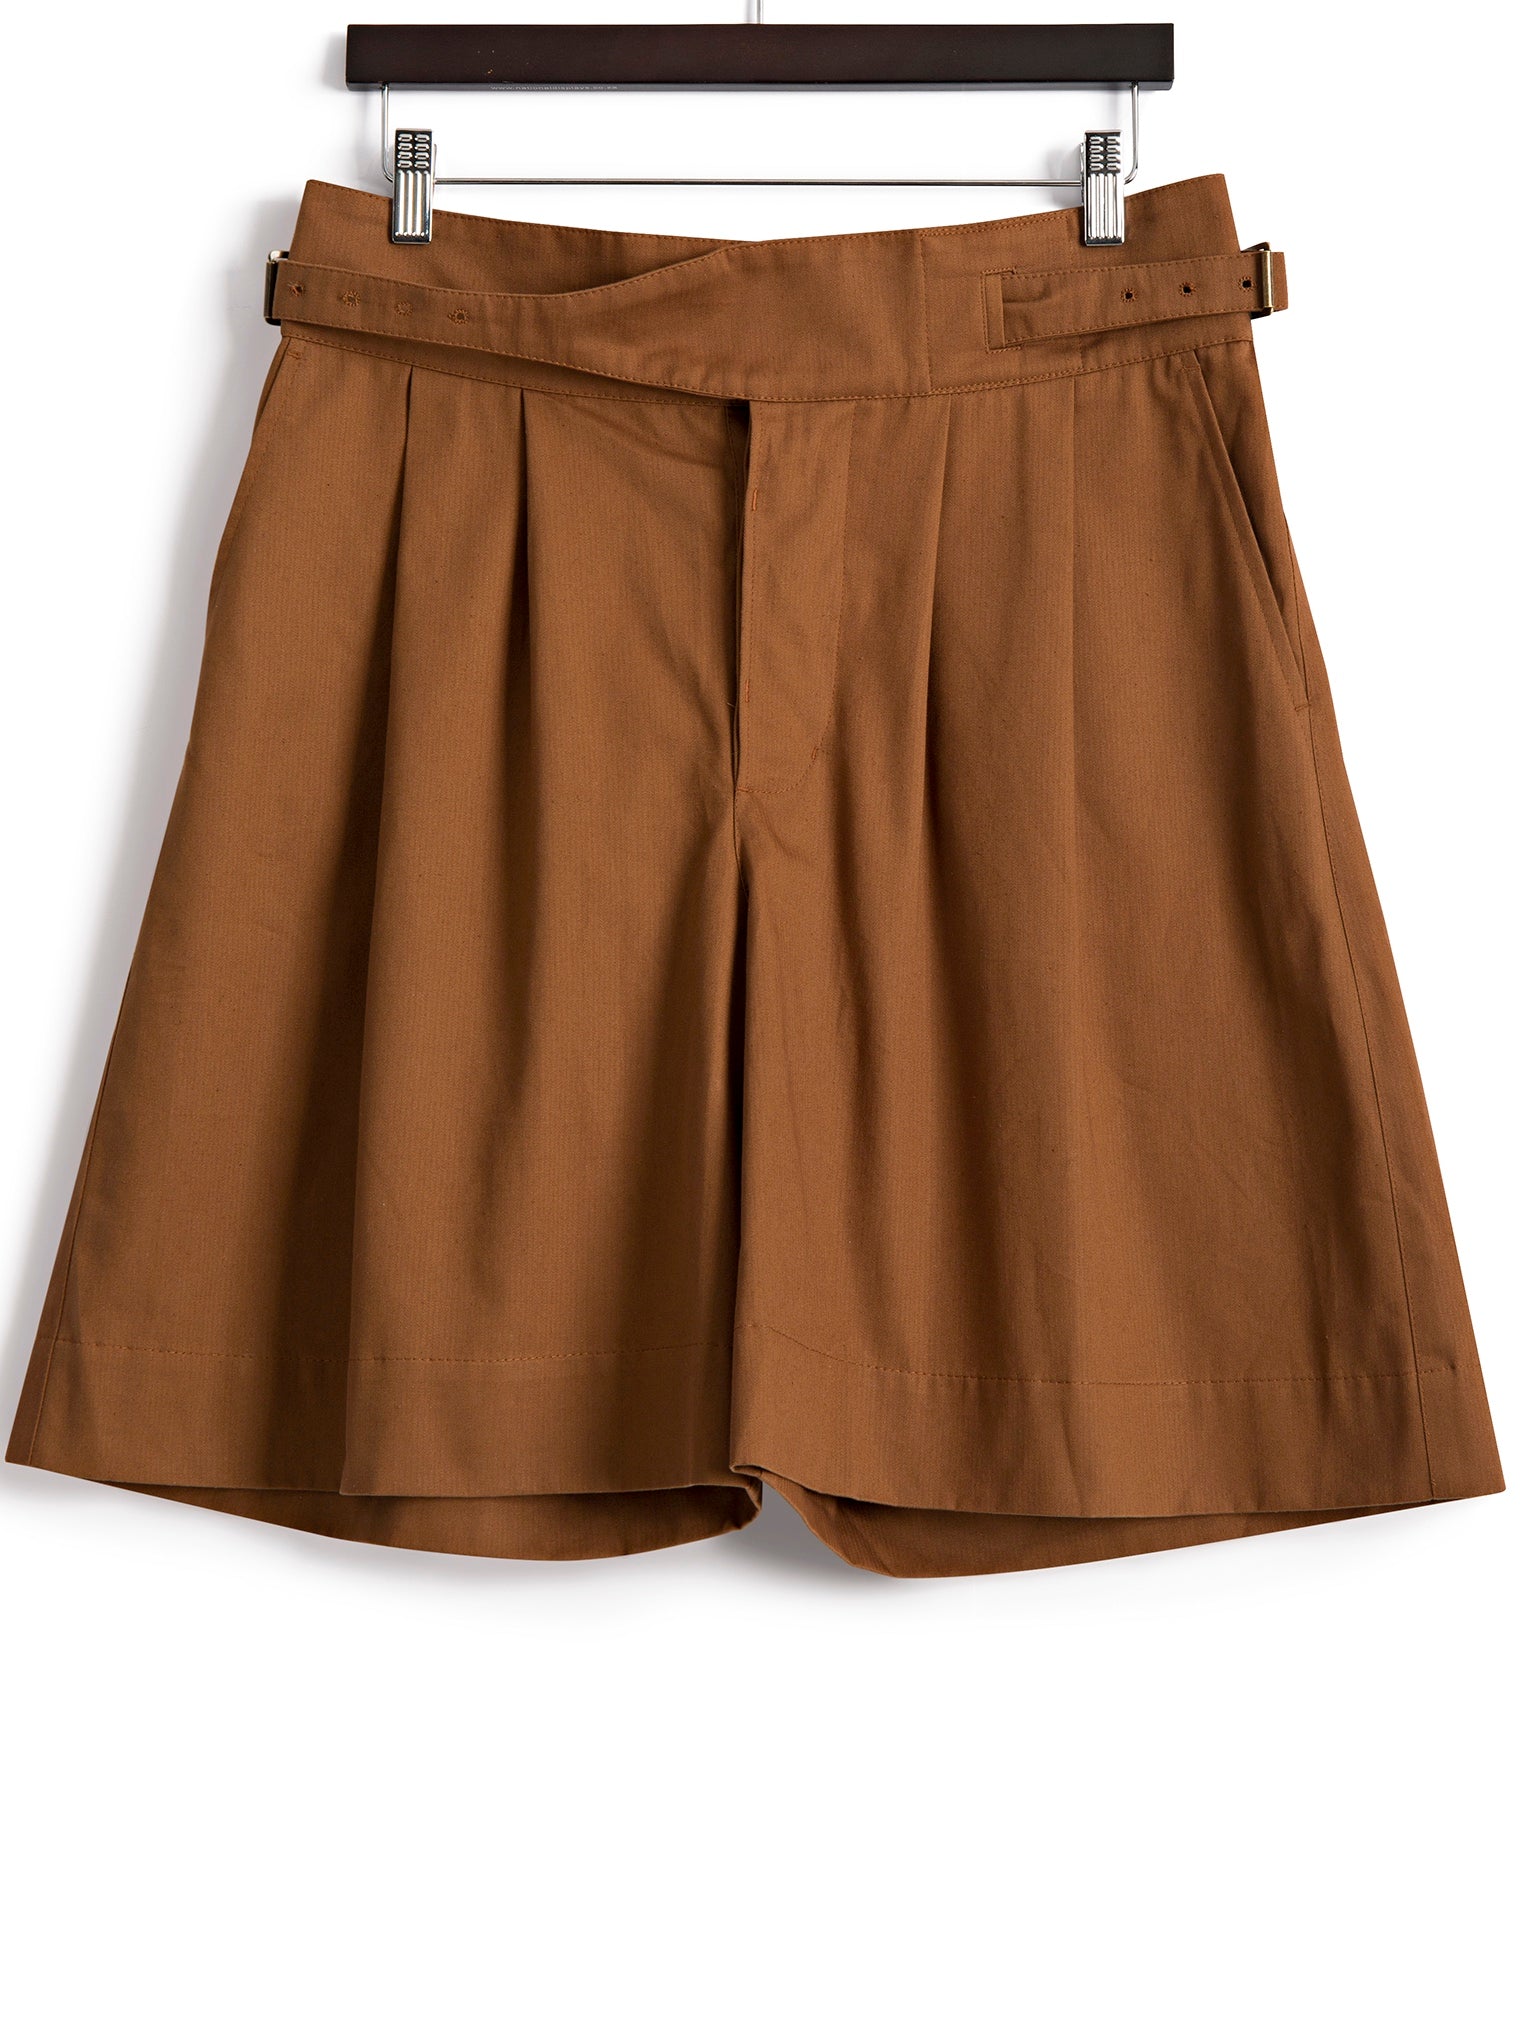 Crossband Shorts in Antelope | Hickman & Bousfield